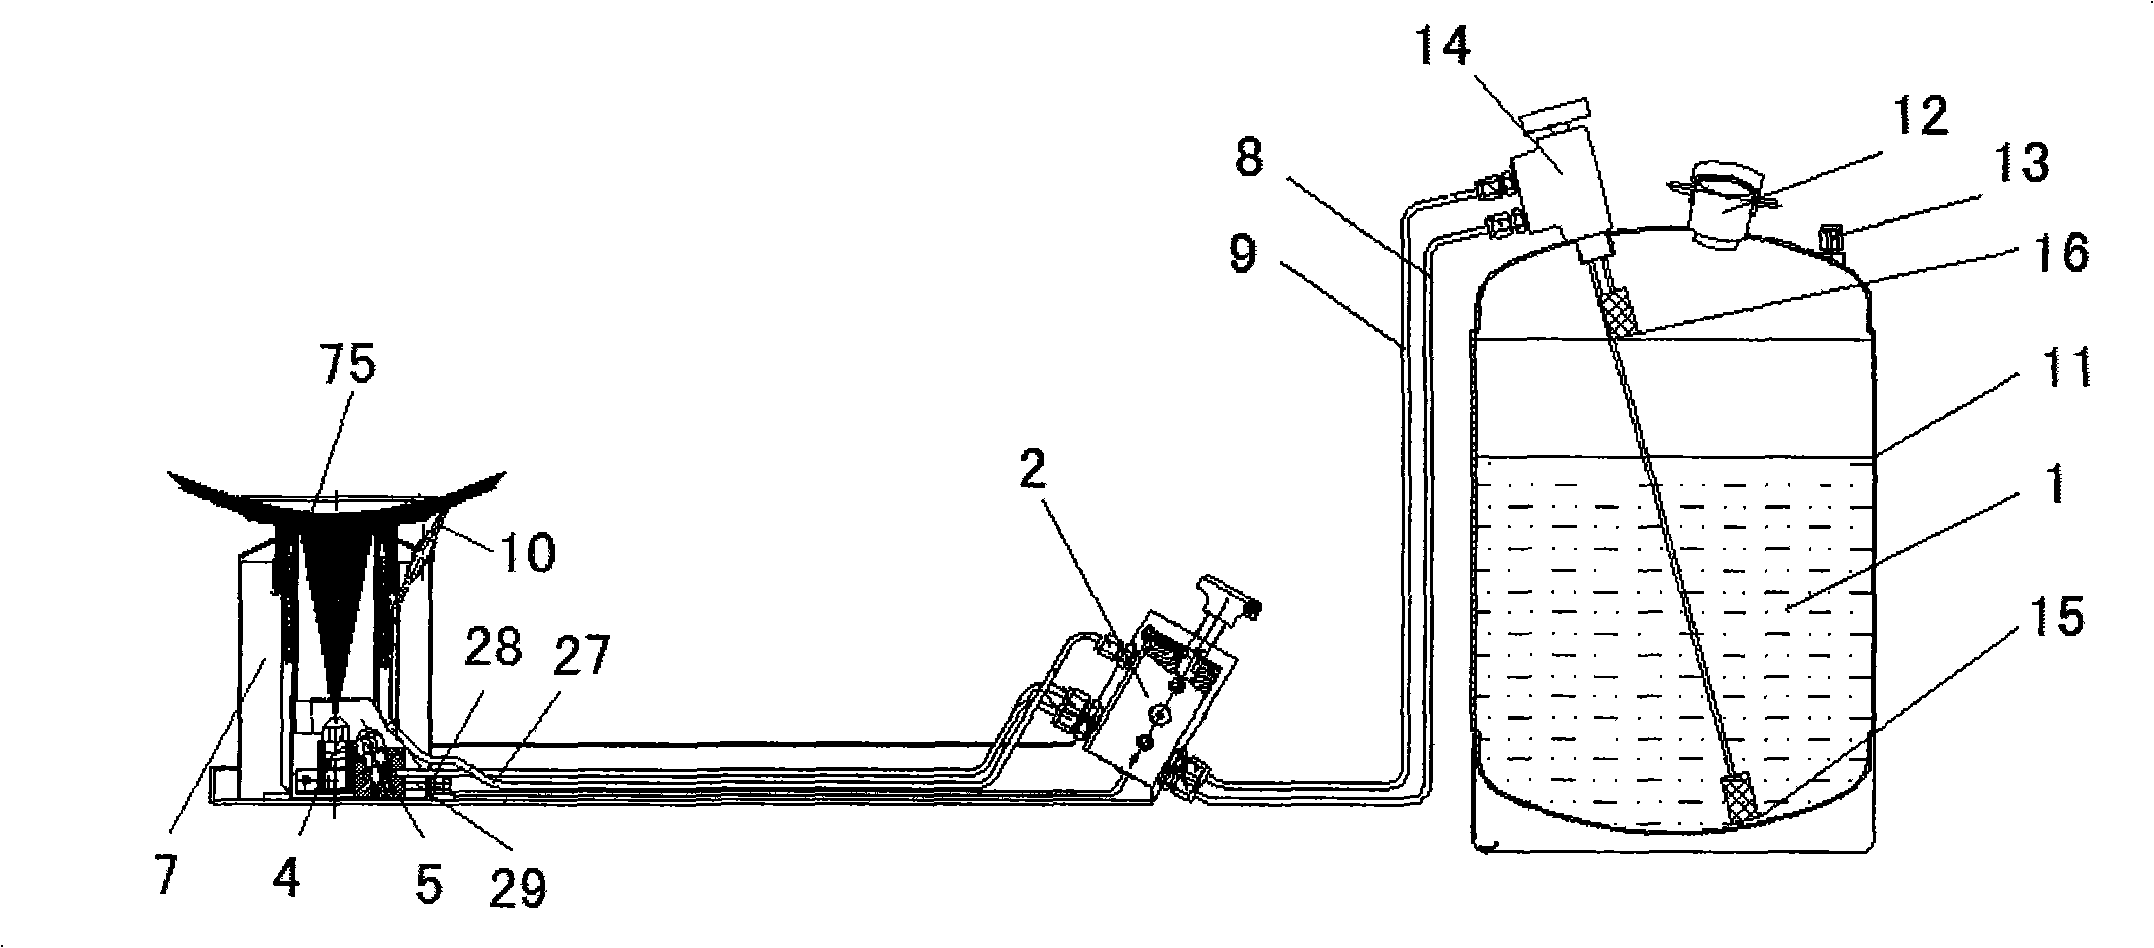 Mixed-oxygen preheating oil burning system